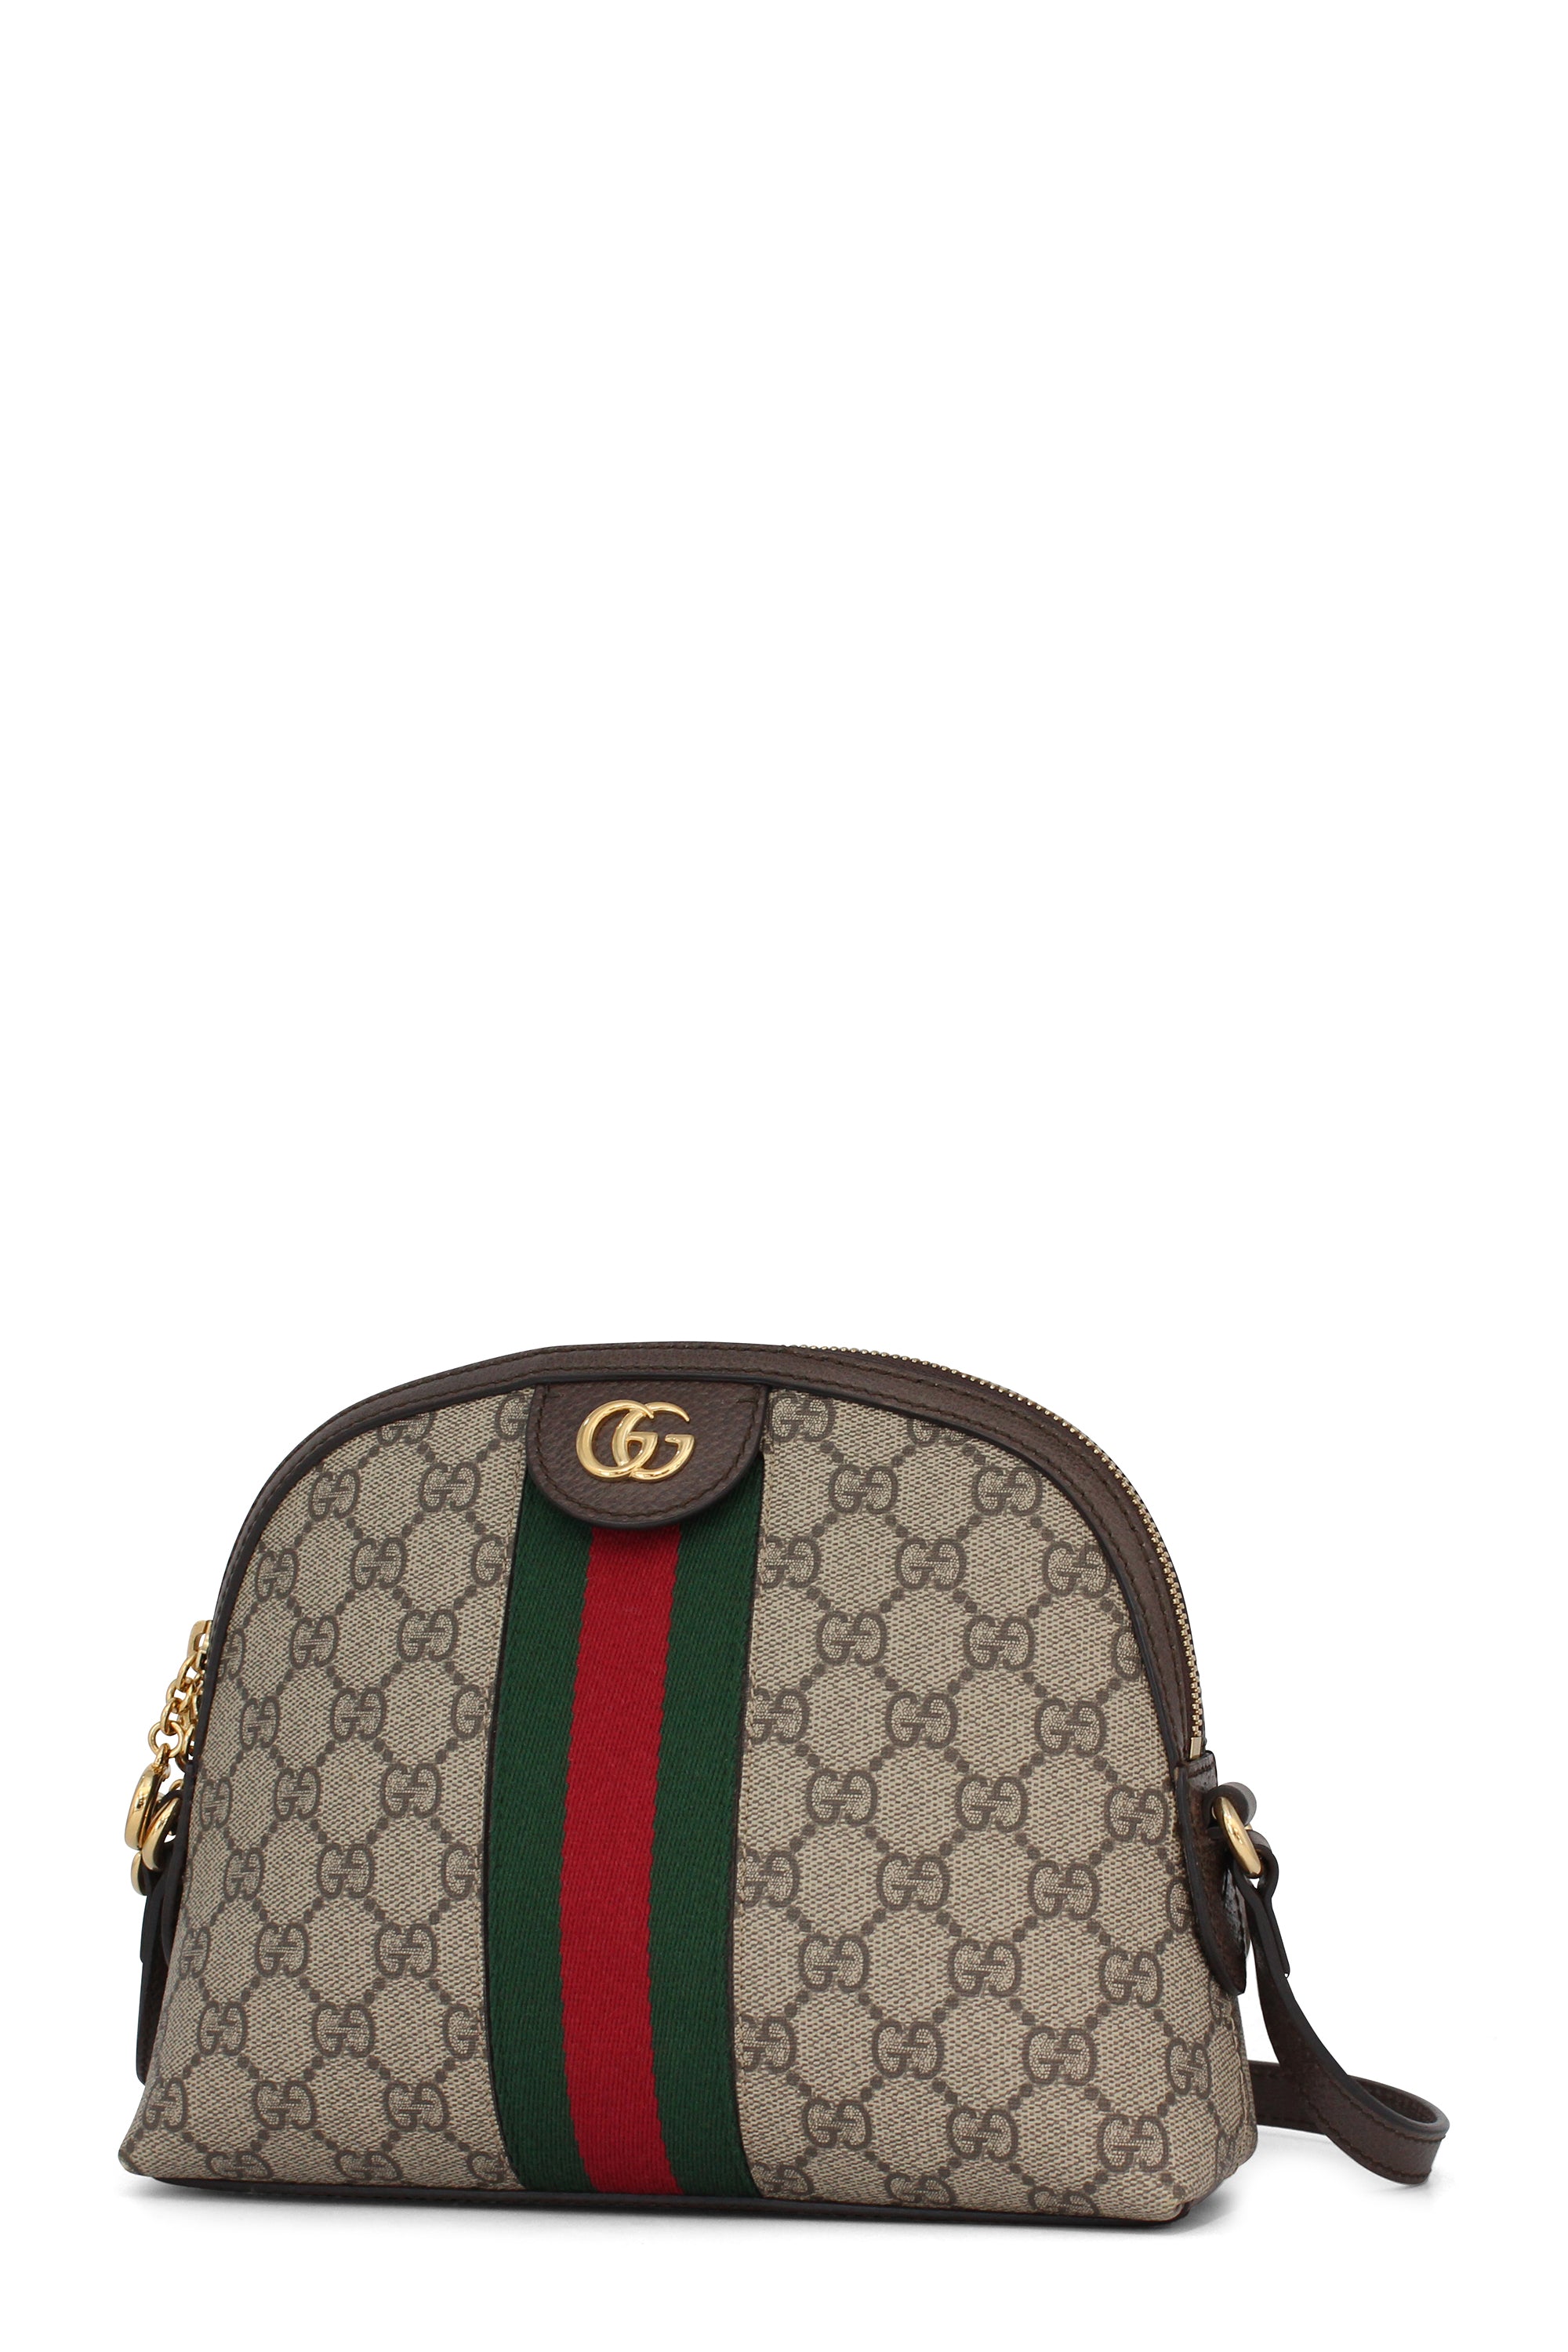 Gucci Ophidia GG Mini Shoulder Bag in Brown